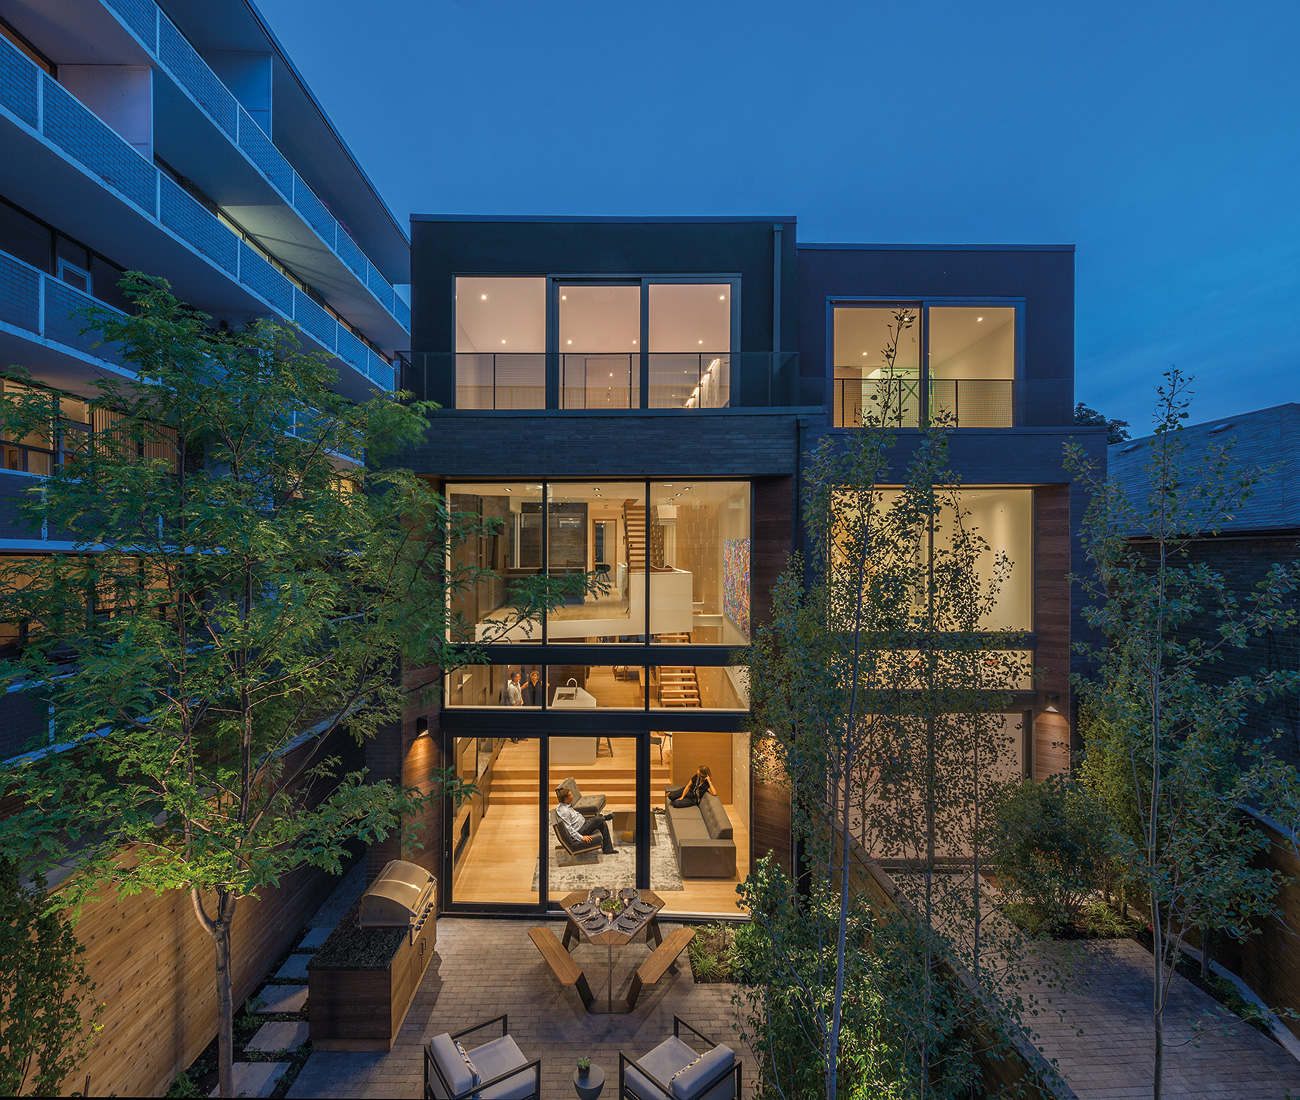 Even though Relmar House is surrounded by residential buildings, the glassed-in rear section offers enough privacy that it doesn’t need curtains.